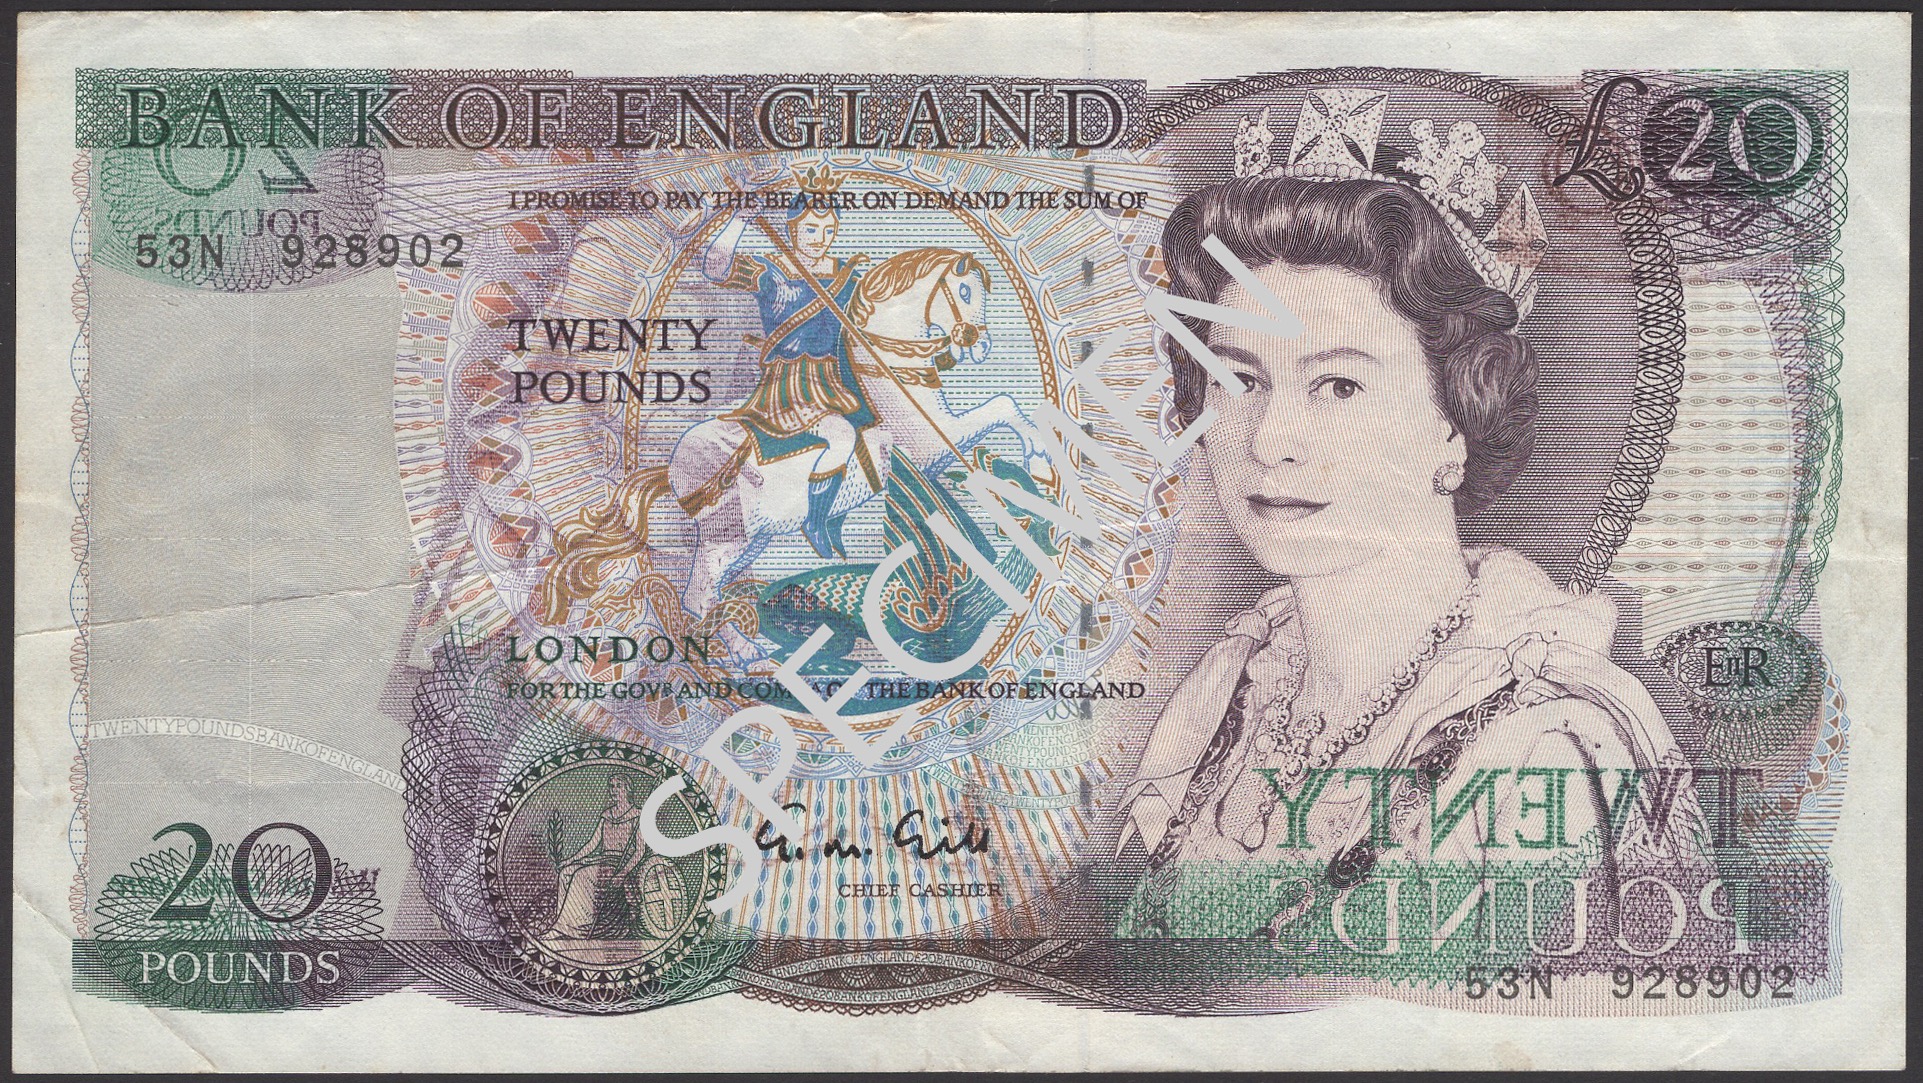 A Remarkable Collection of Bank of England Errors - Part Three